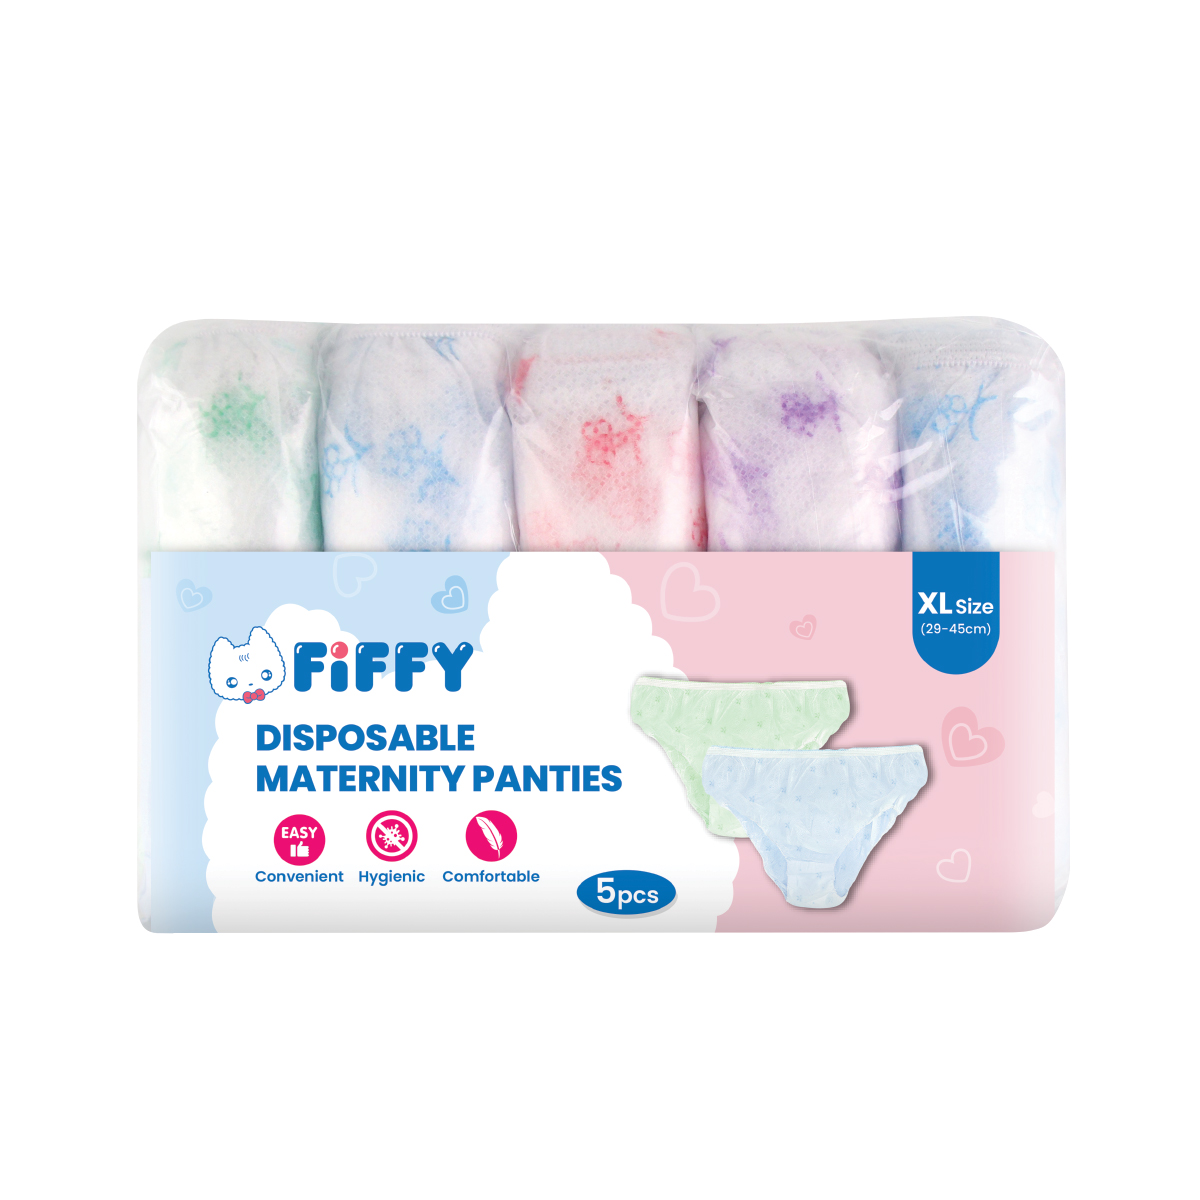 FIFFY DISPOSABLE MATERNITY PANTIES